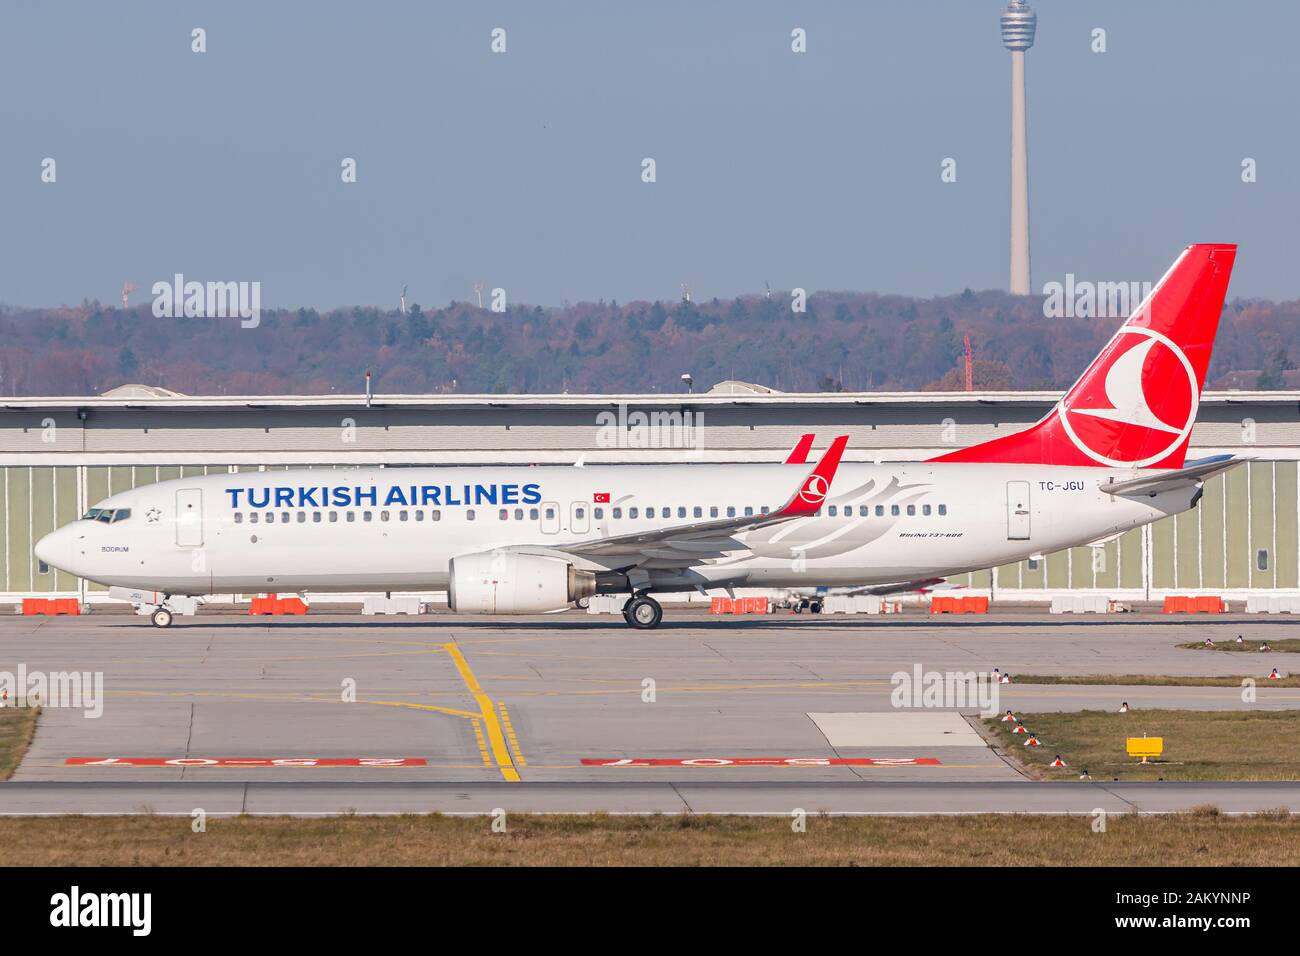 Stuttgart, Germany - November 25, 2018: Turkish Airlines Boeing 737 airplane at Stuttgart airport (STR) in Germany. Boeing is an aircraft manufacturer Stock Photo